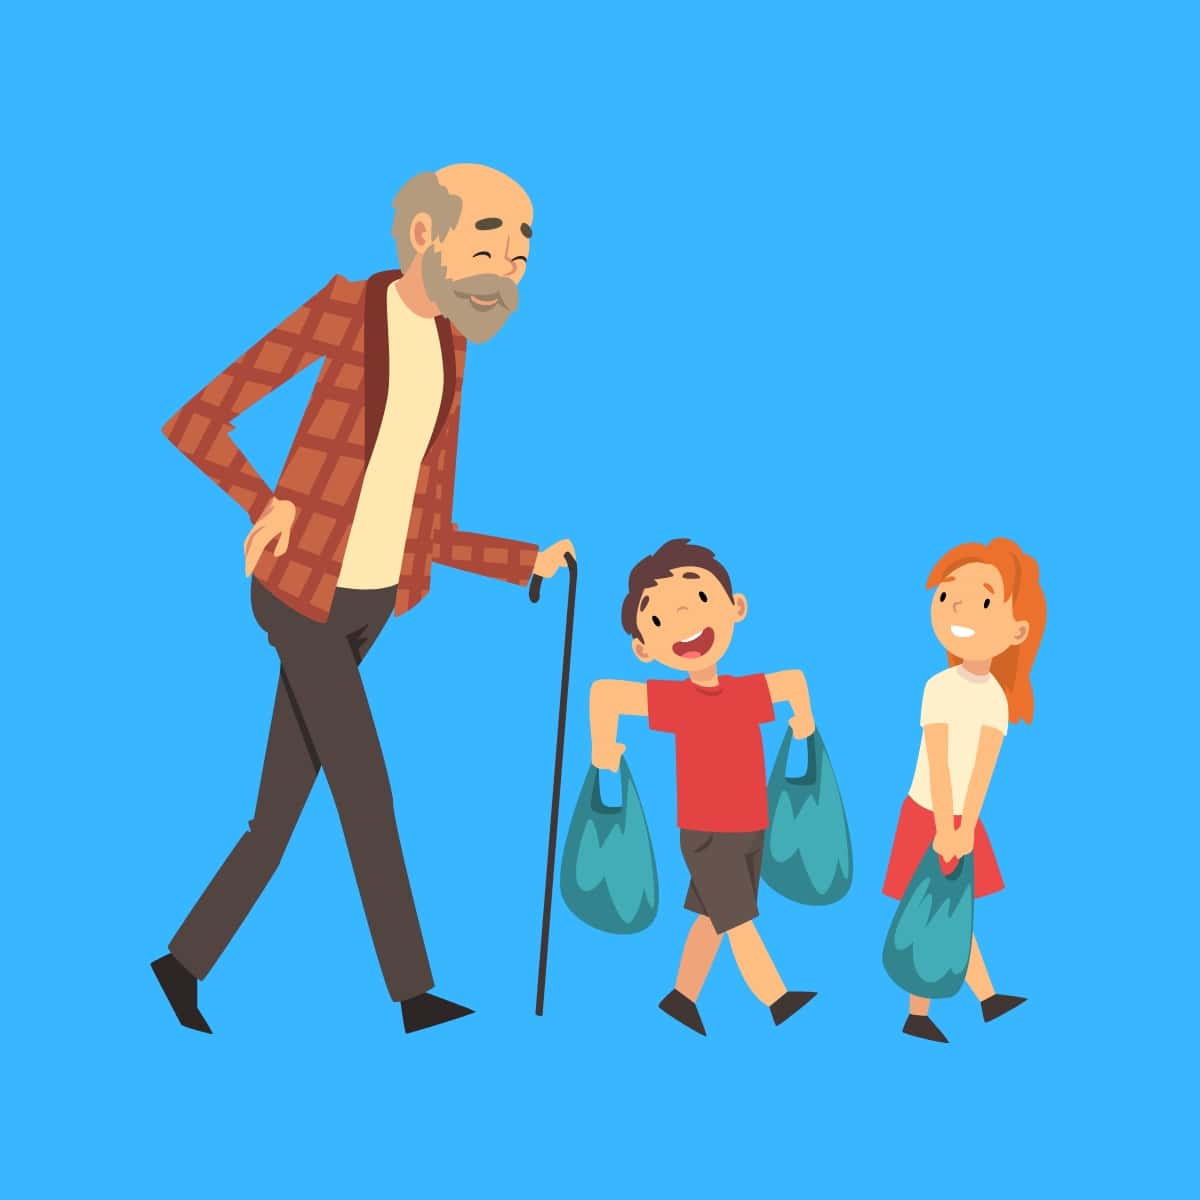 Cartoon graphic of a grandpa walking with a cane and his two grand children who are carrying shopping bags on a blue background.